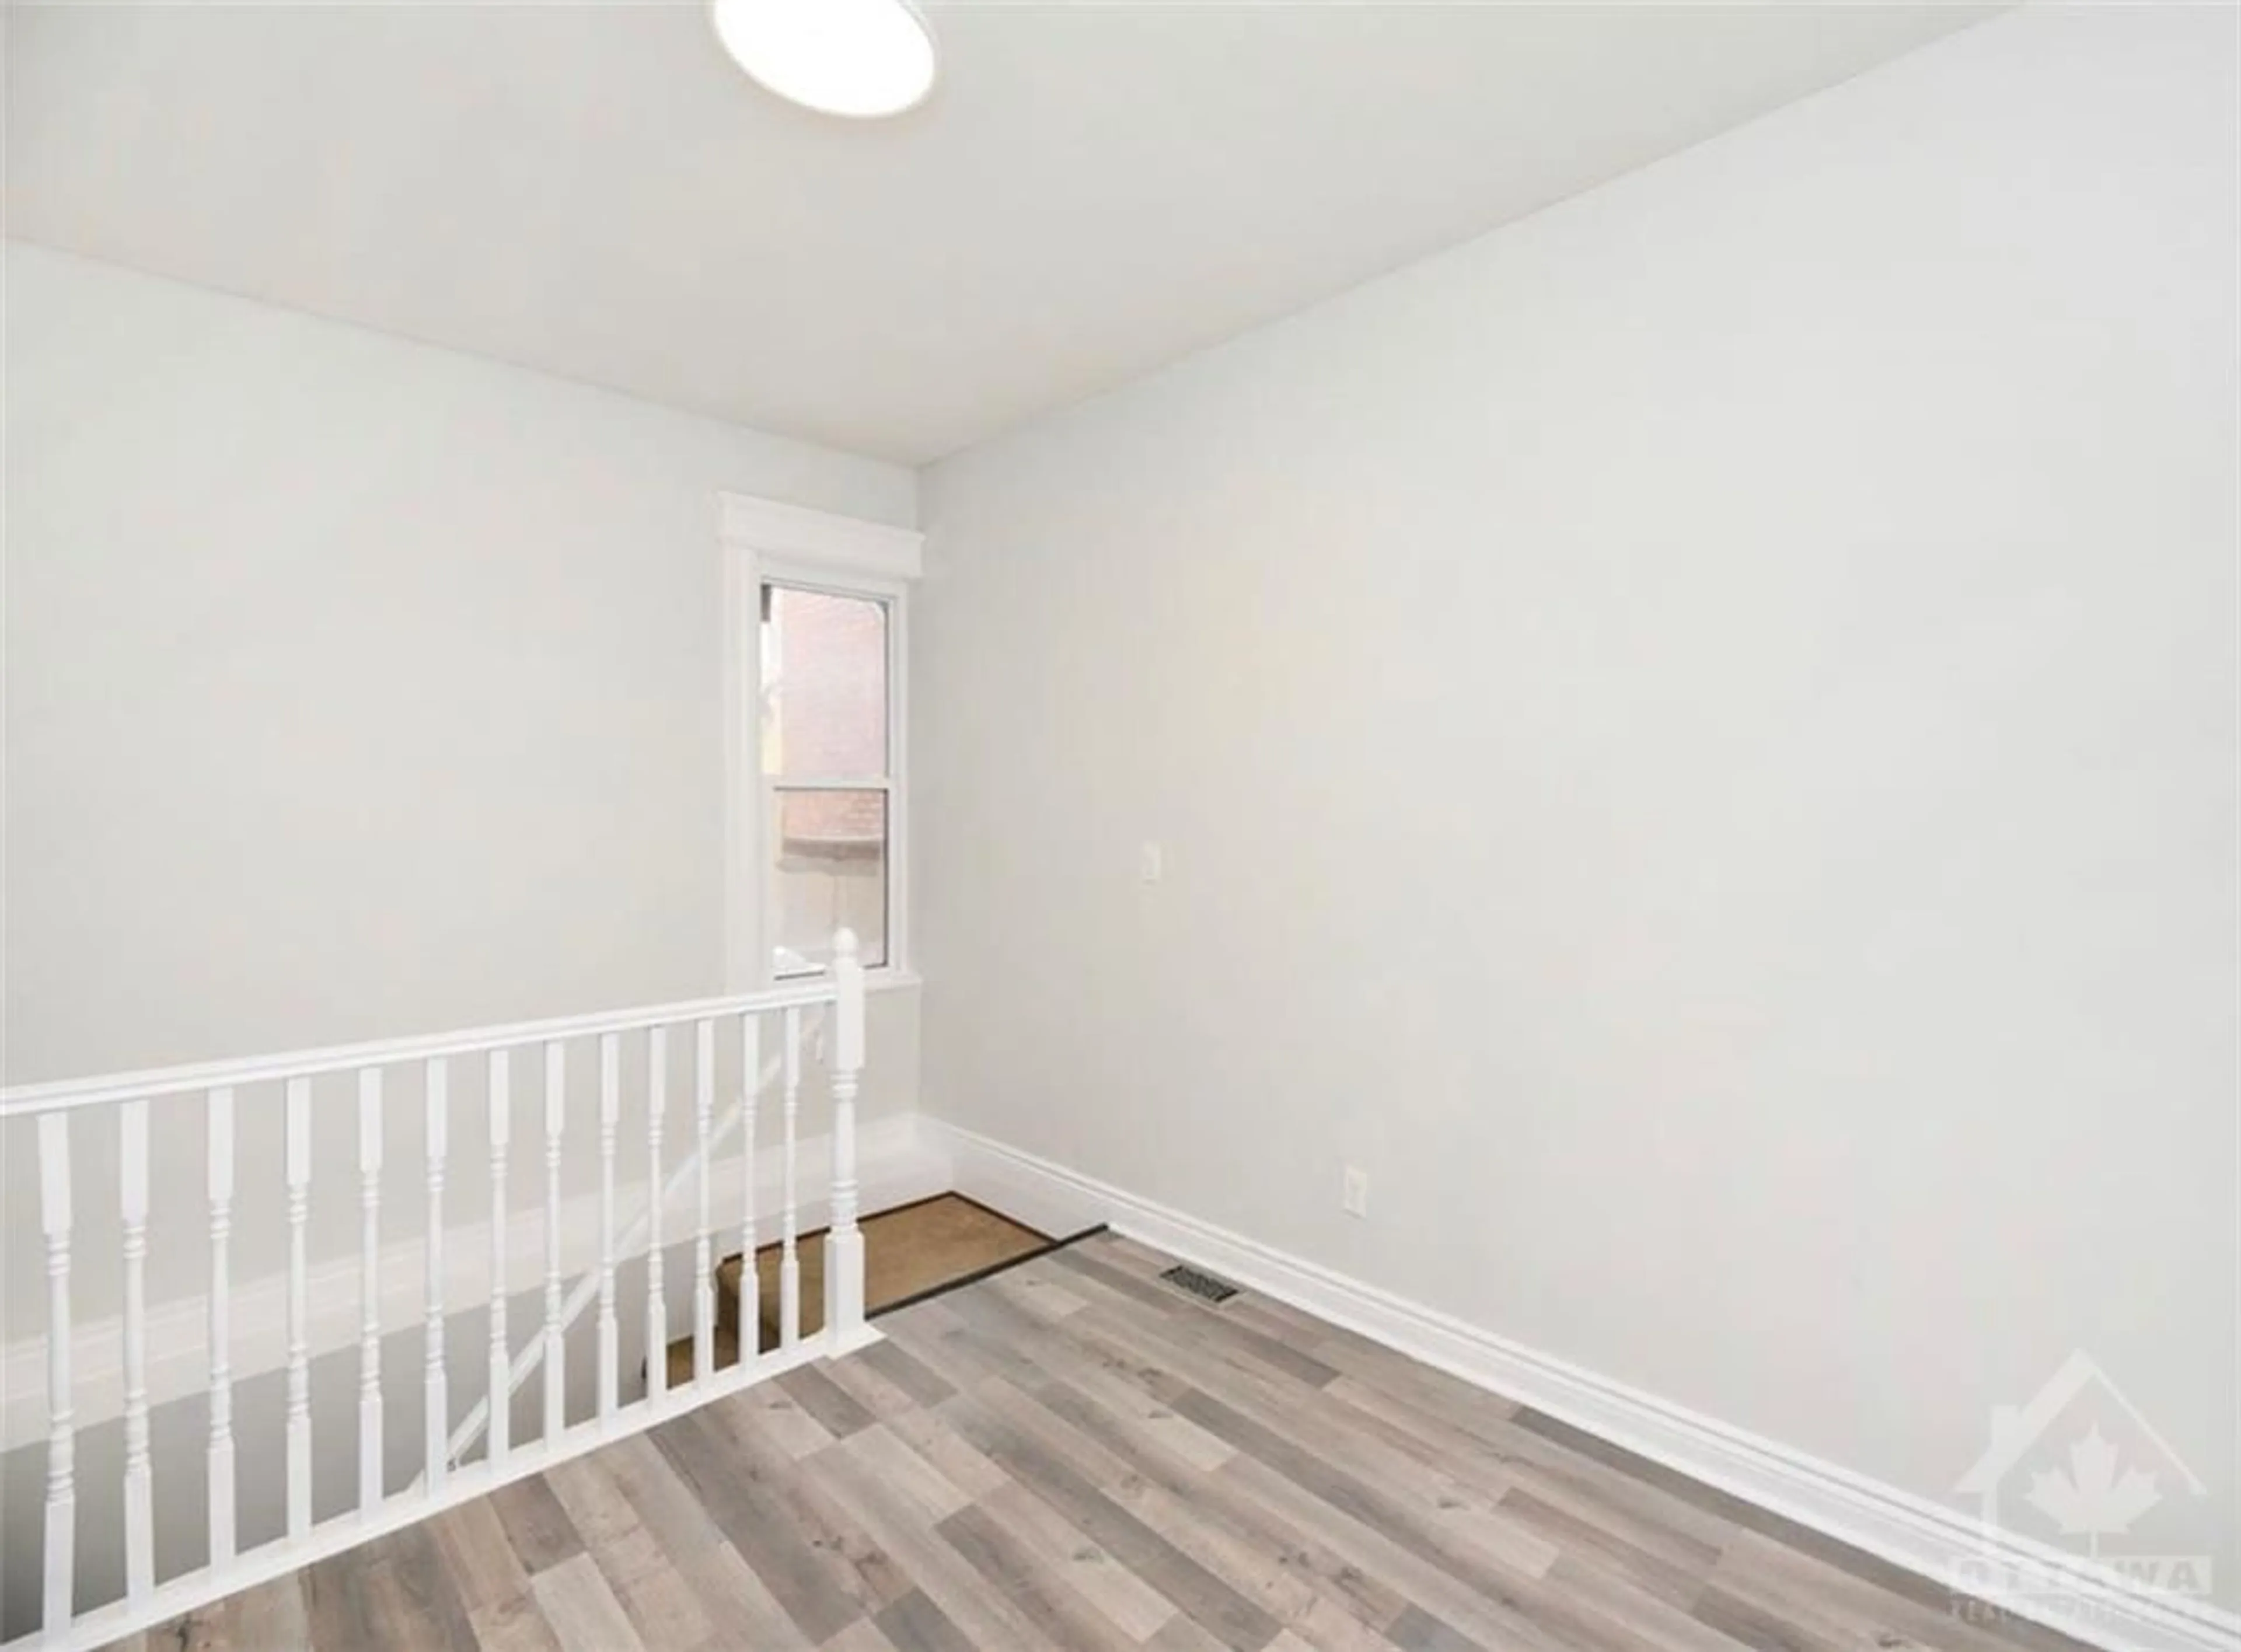 A pic of a room for 73-75 LOWER CHARLOTTE St, Ottawa Ontario K1N 8J9